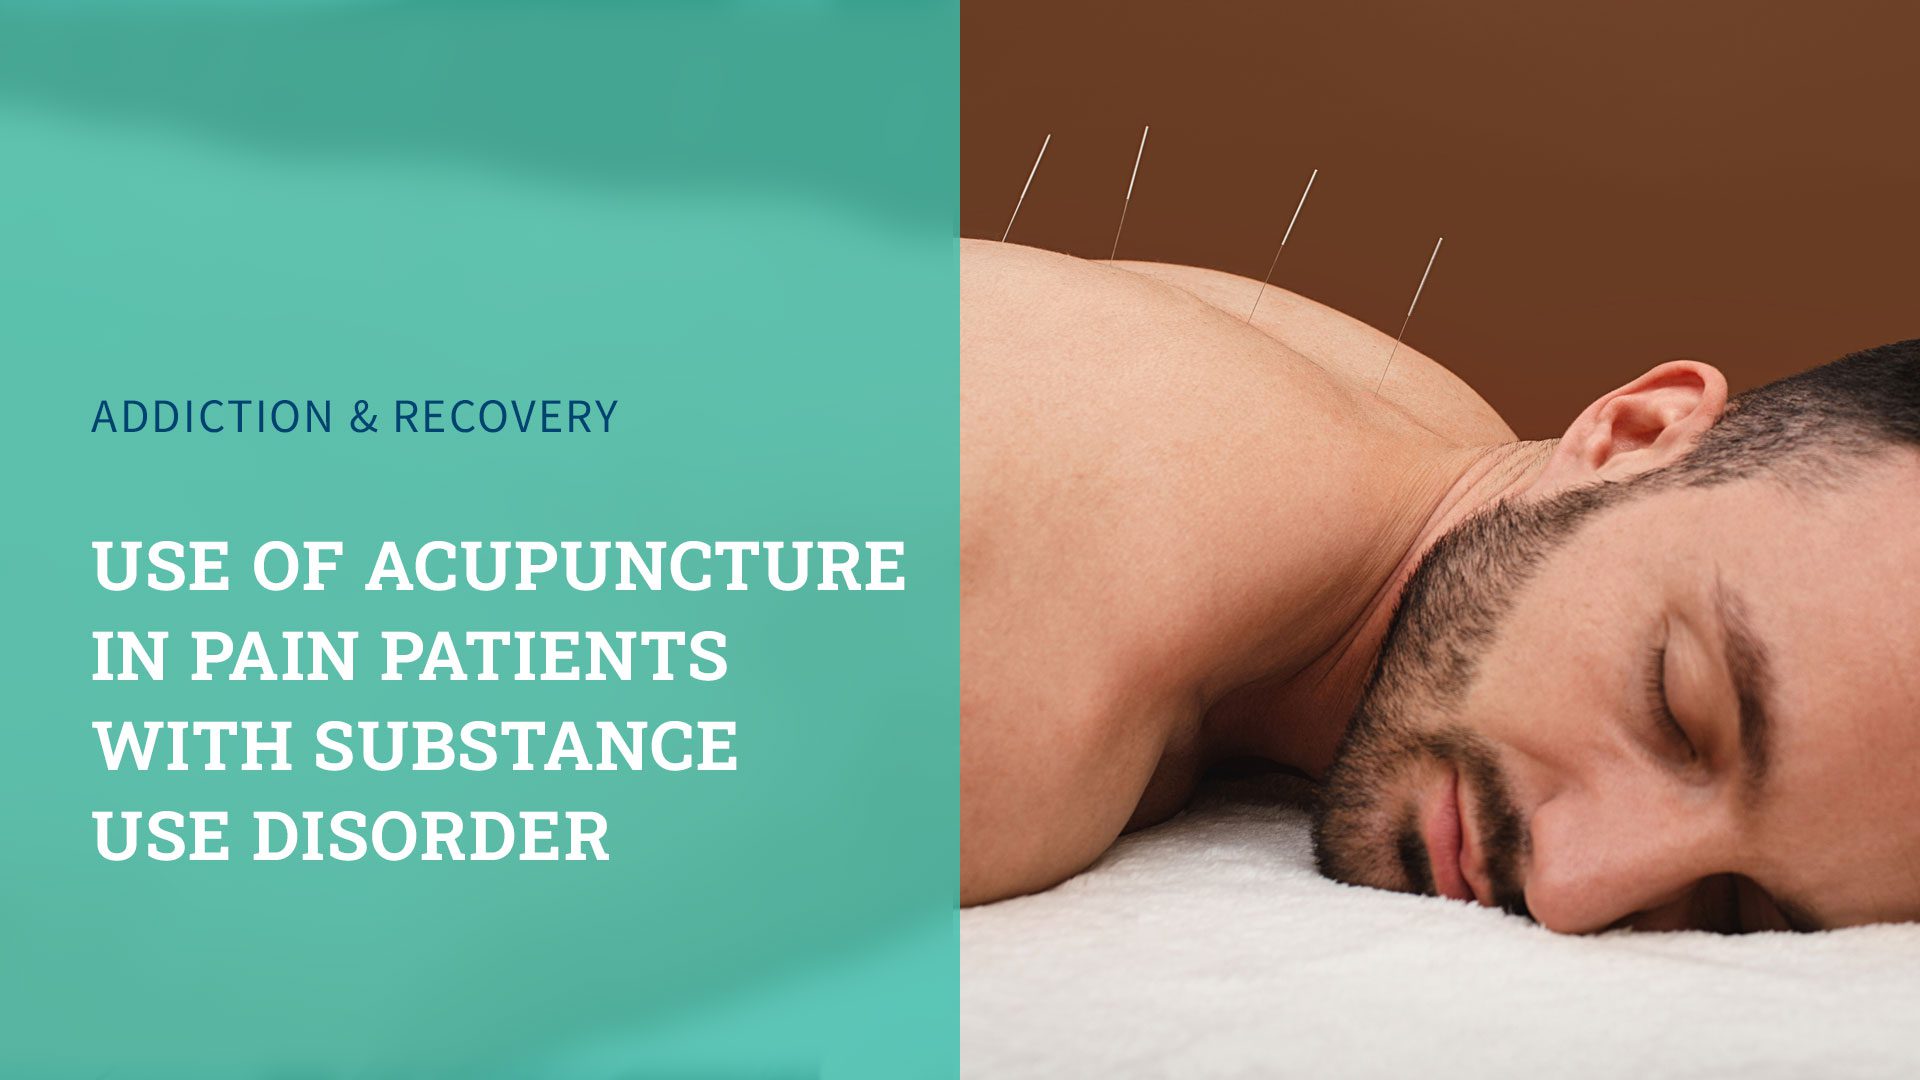 Use of Acupuncture in Pain Patients with Substance Use Disorder